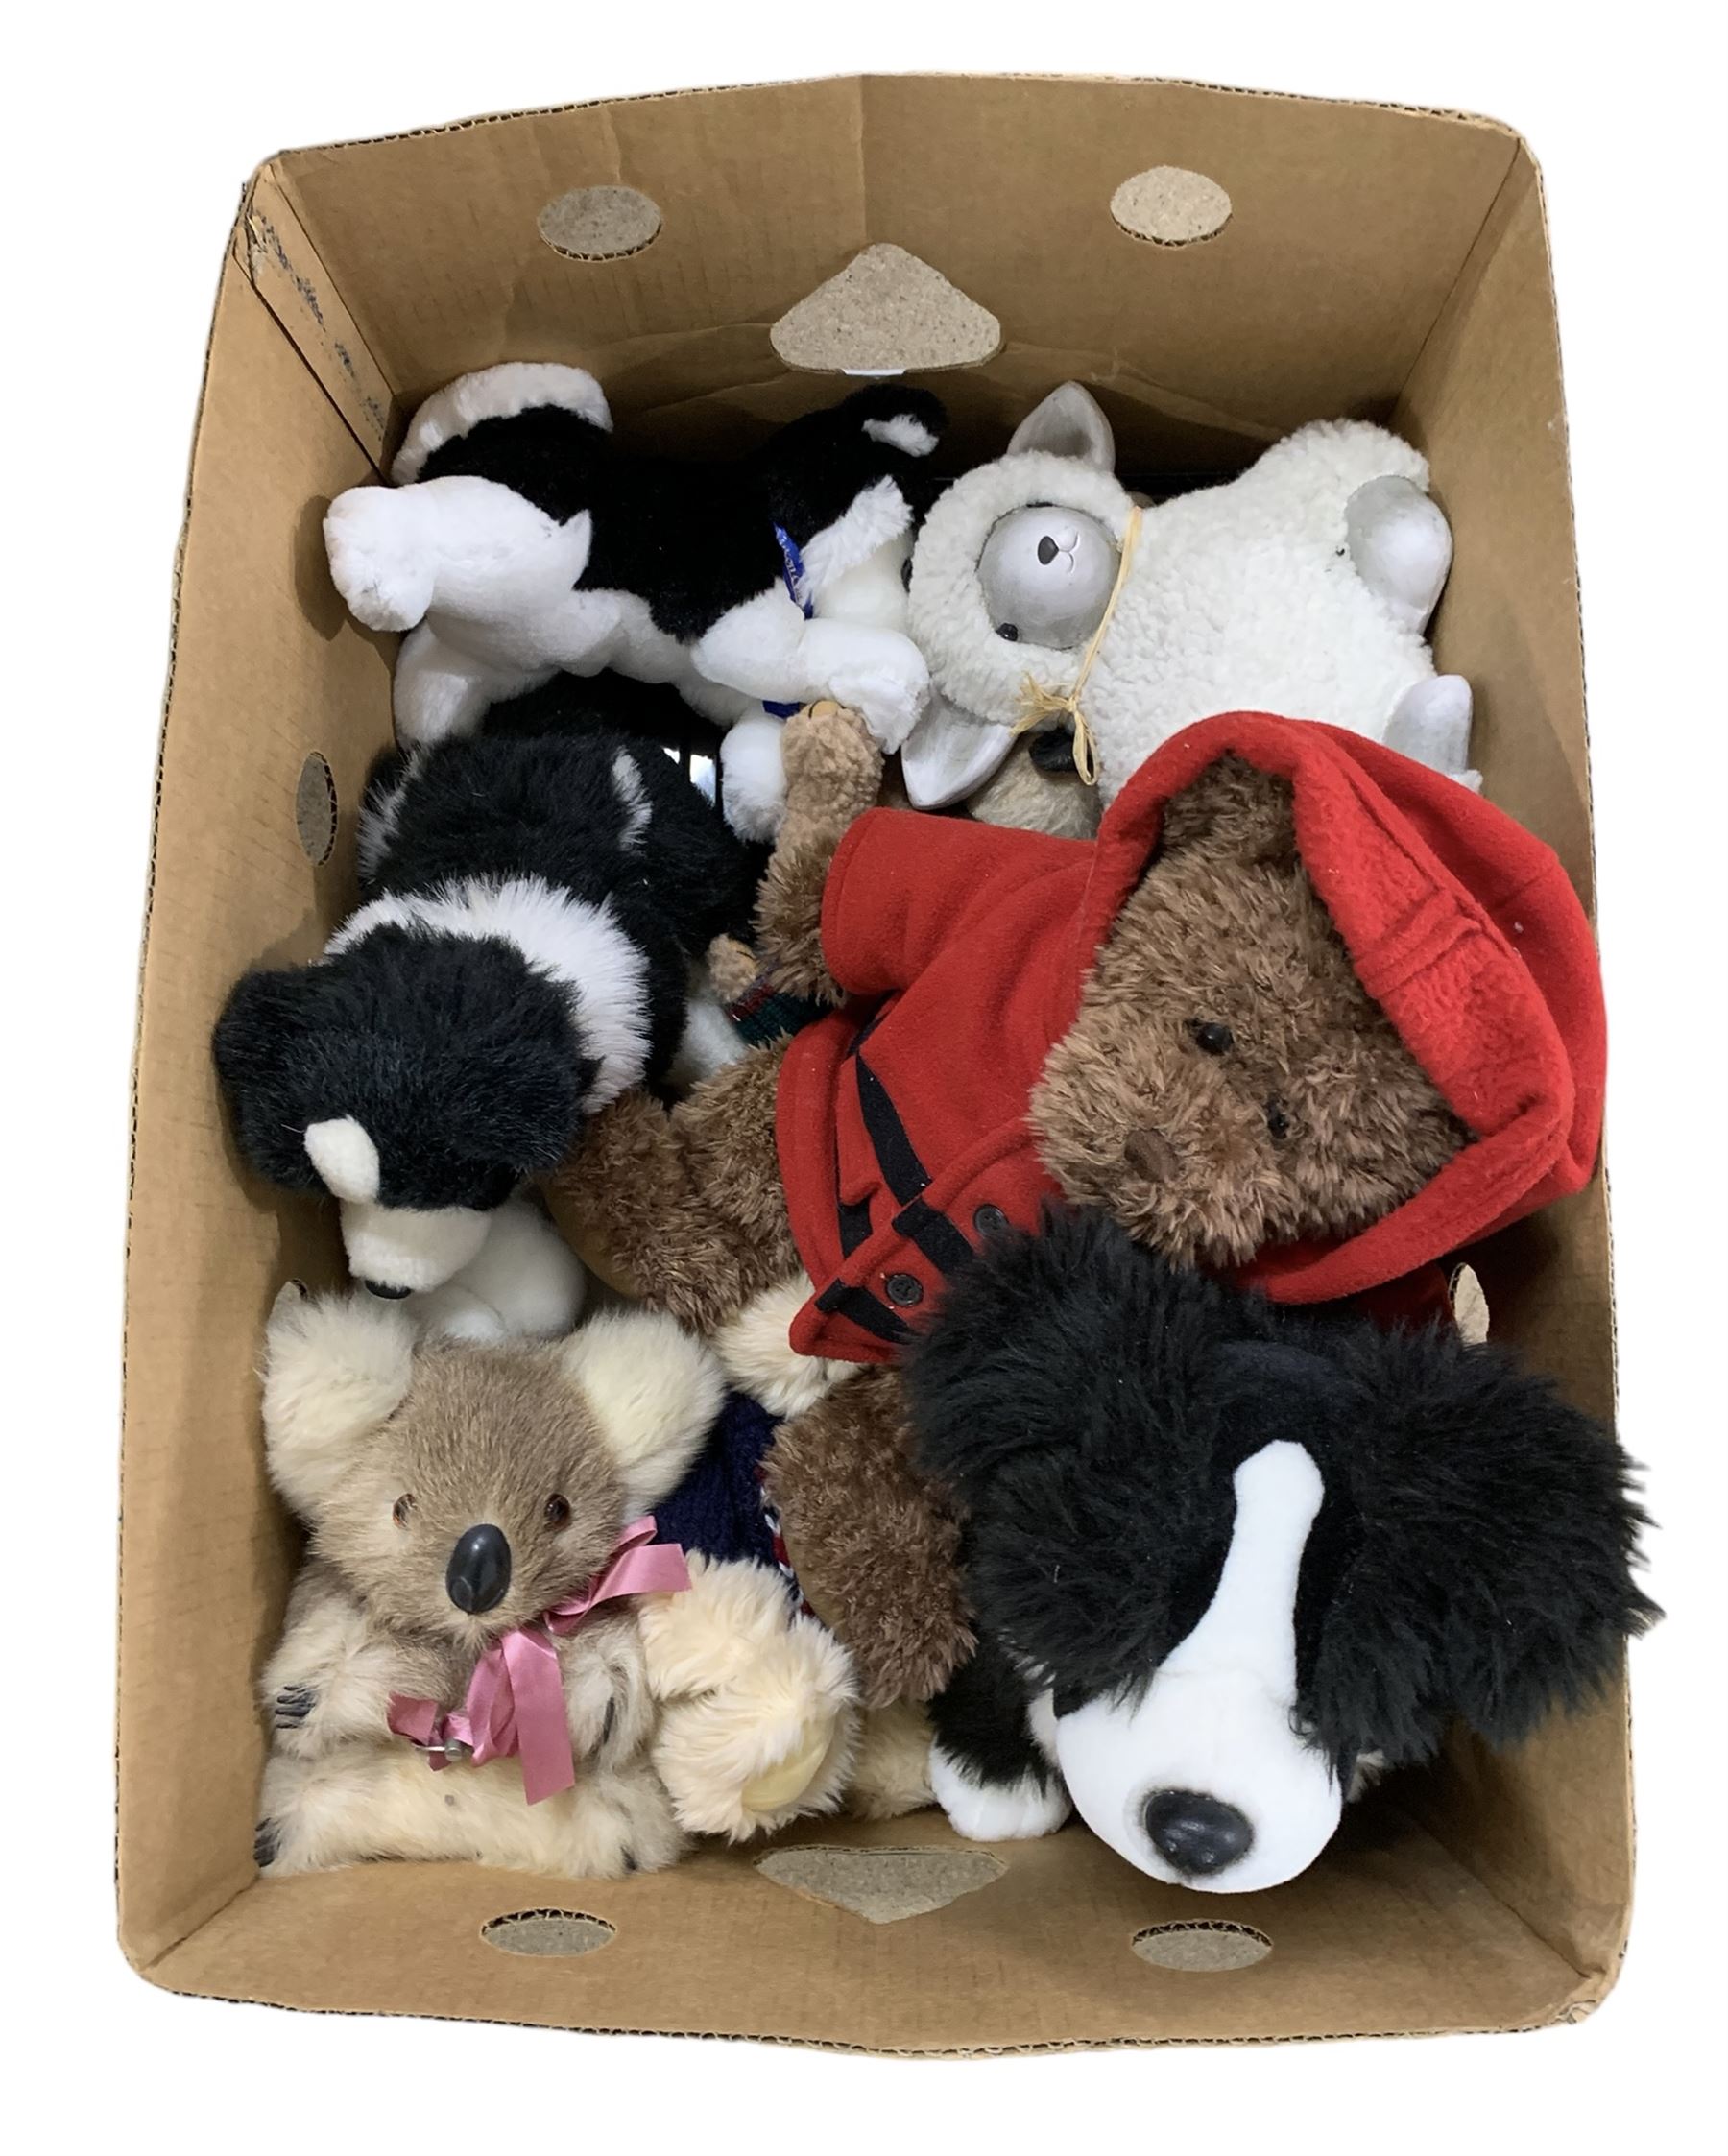 Various stuffed animals in one box